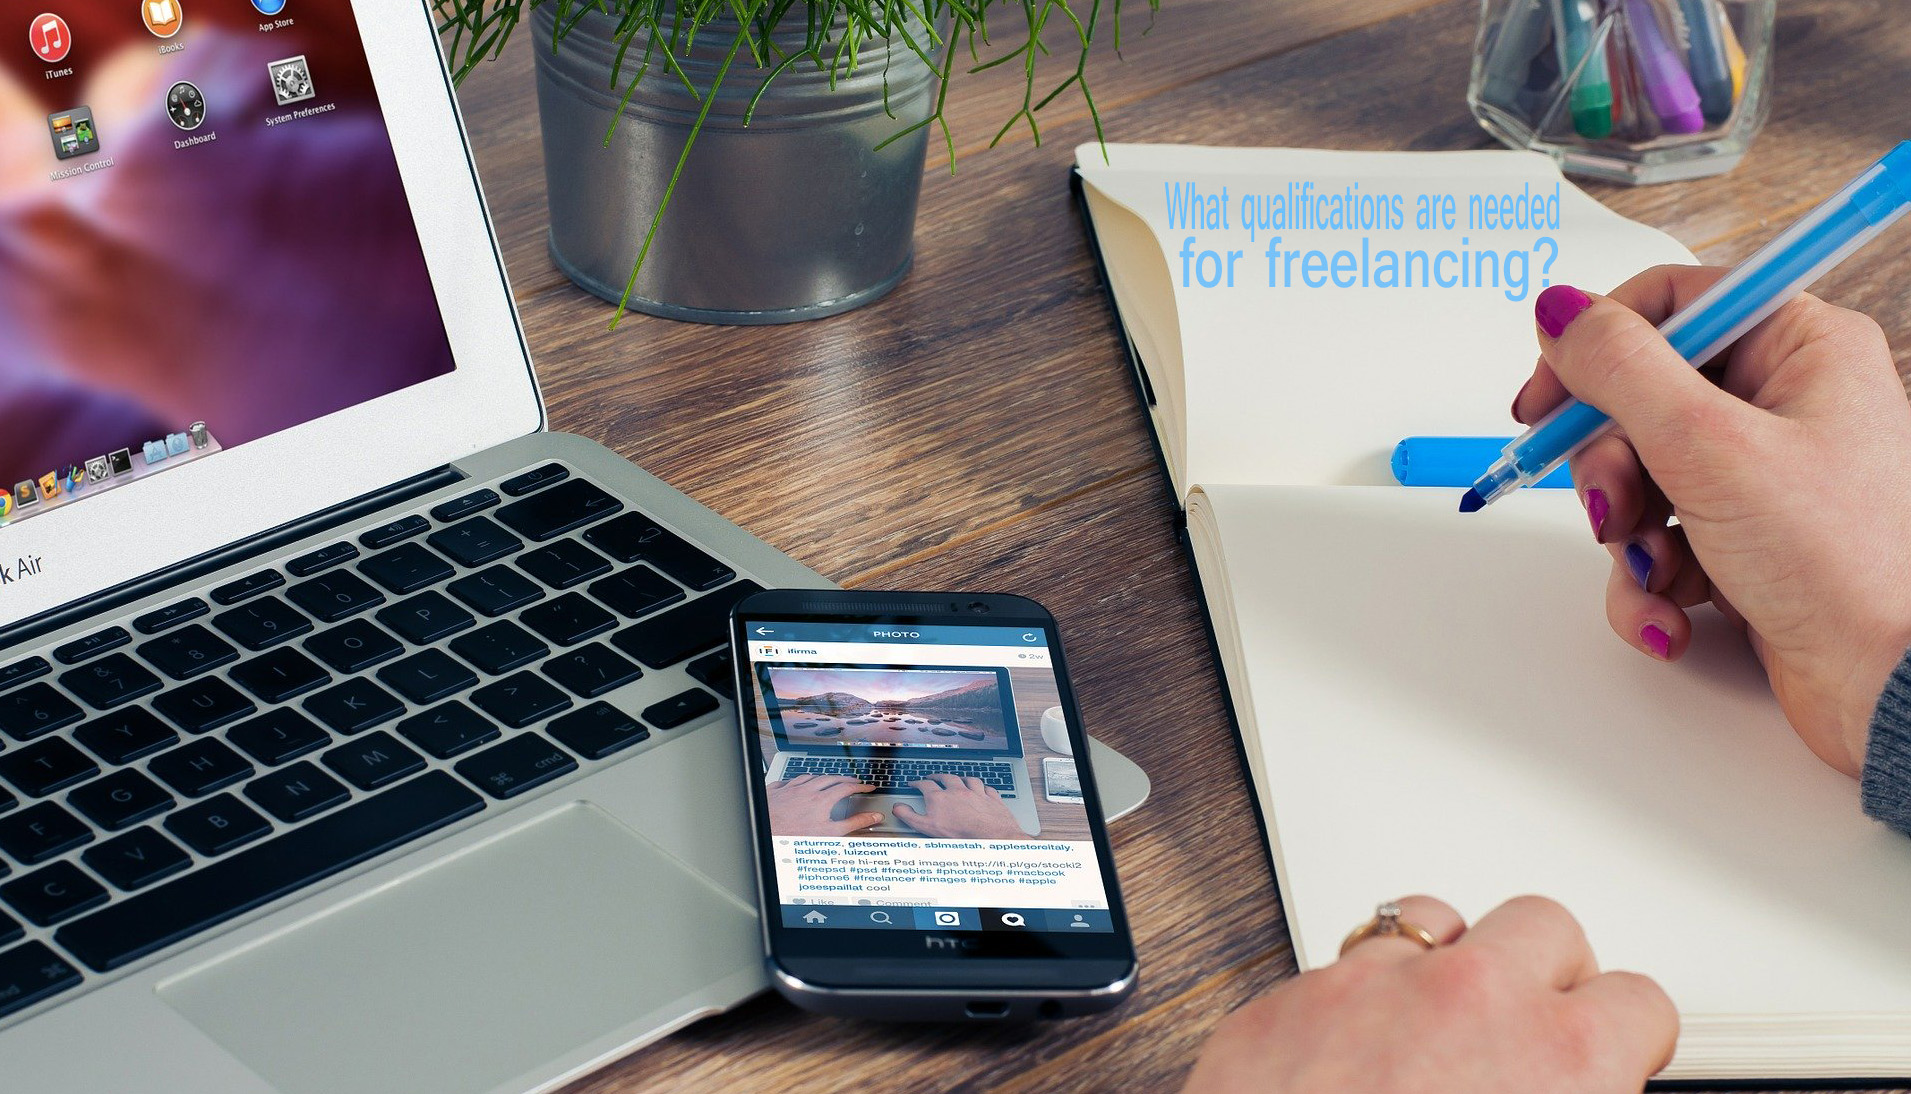 What qualifications are needed for freelancing